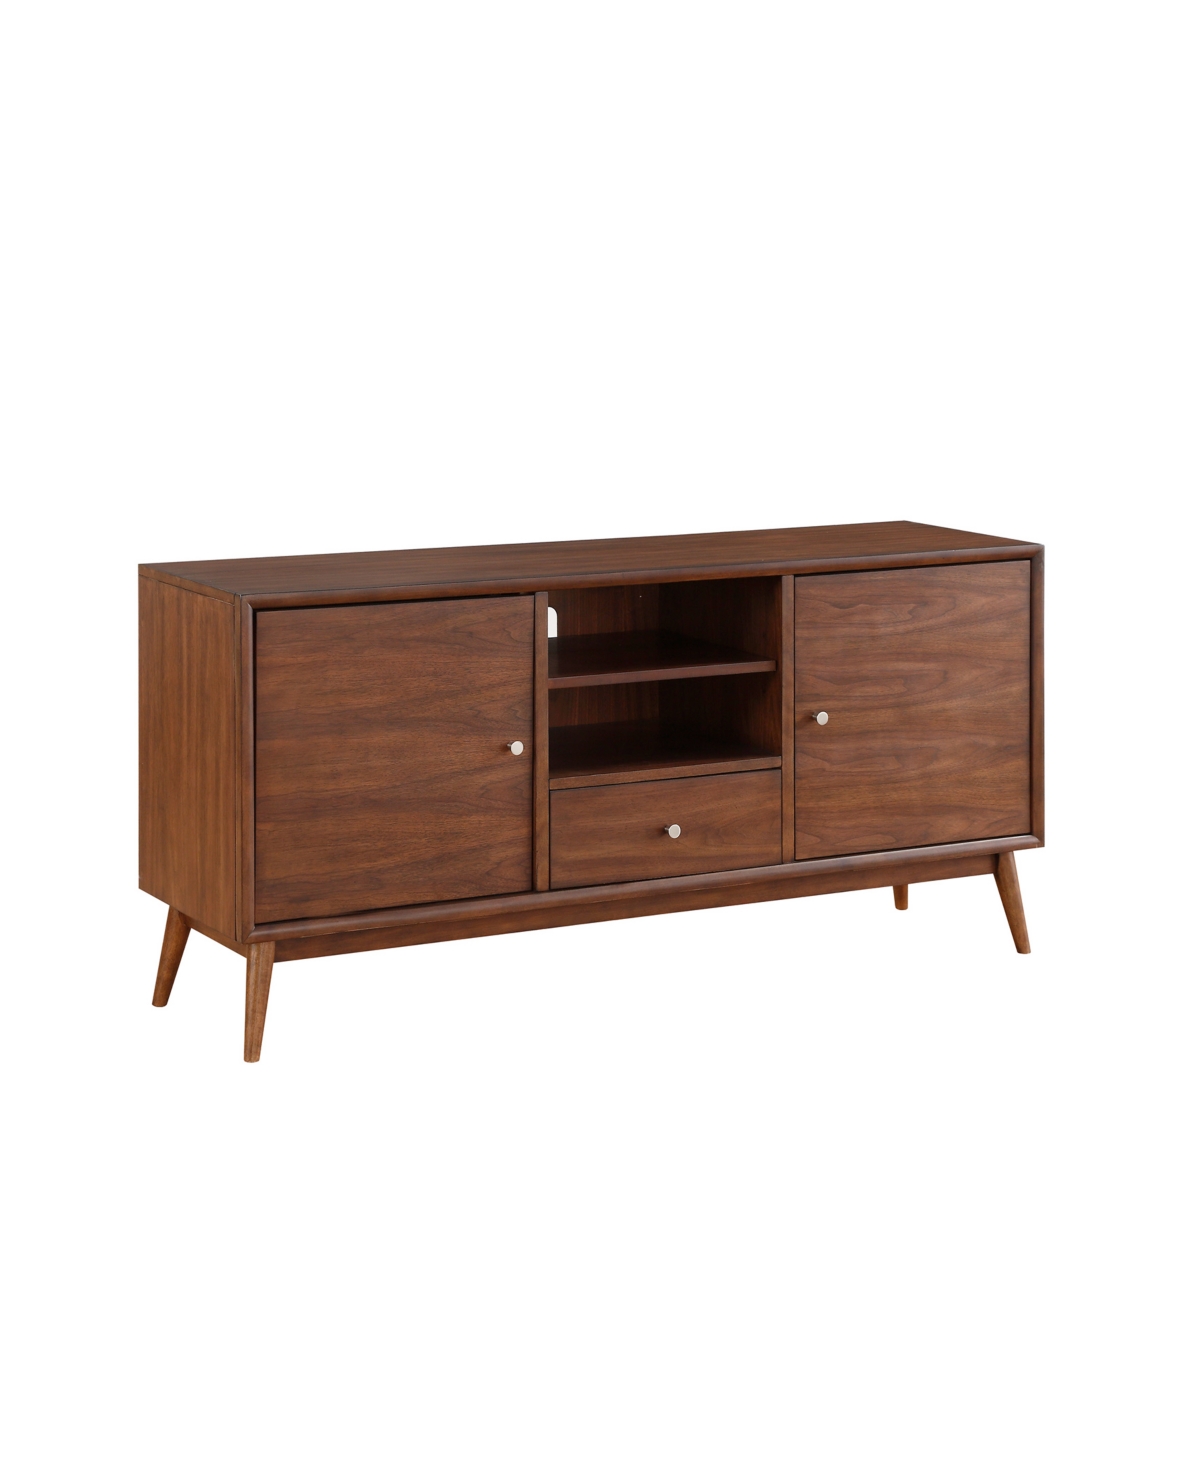 Furniture Kendall 64" Tv Stand In Brown